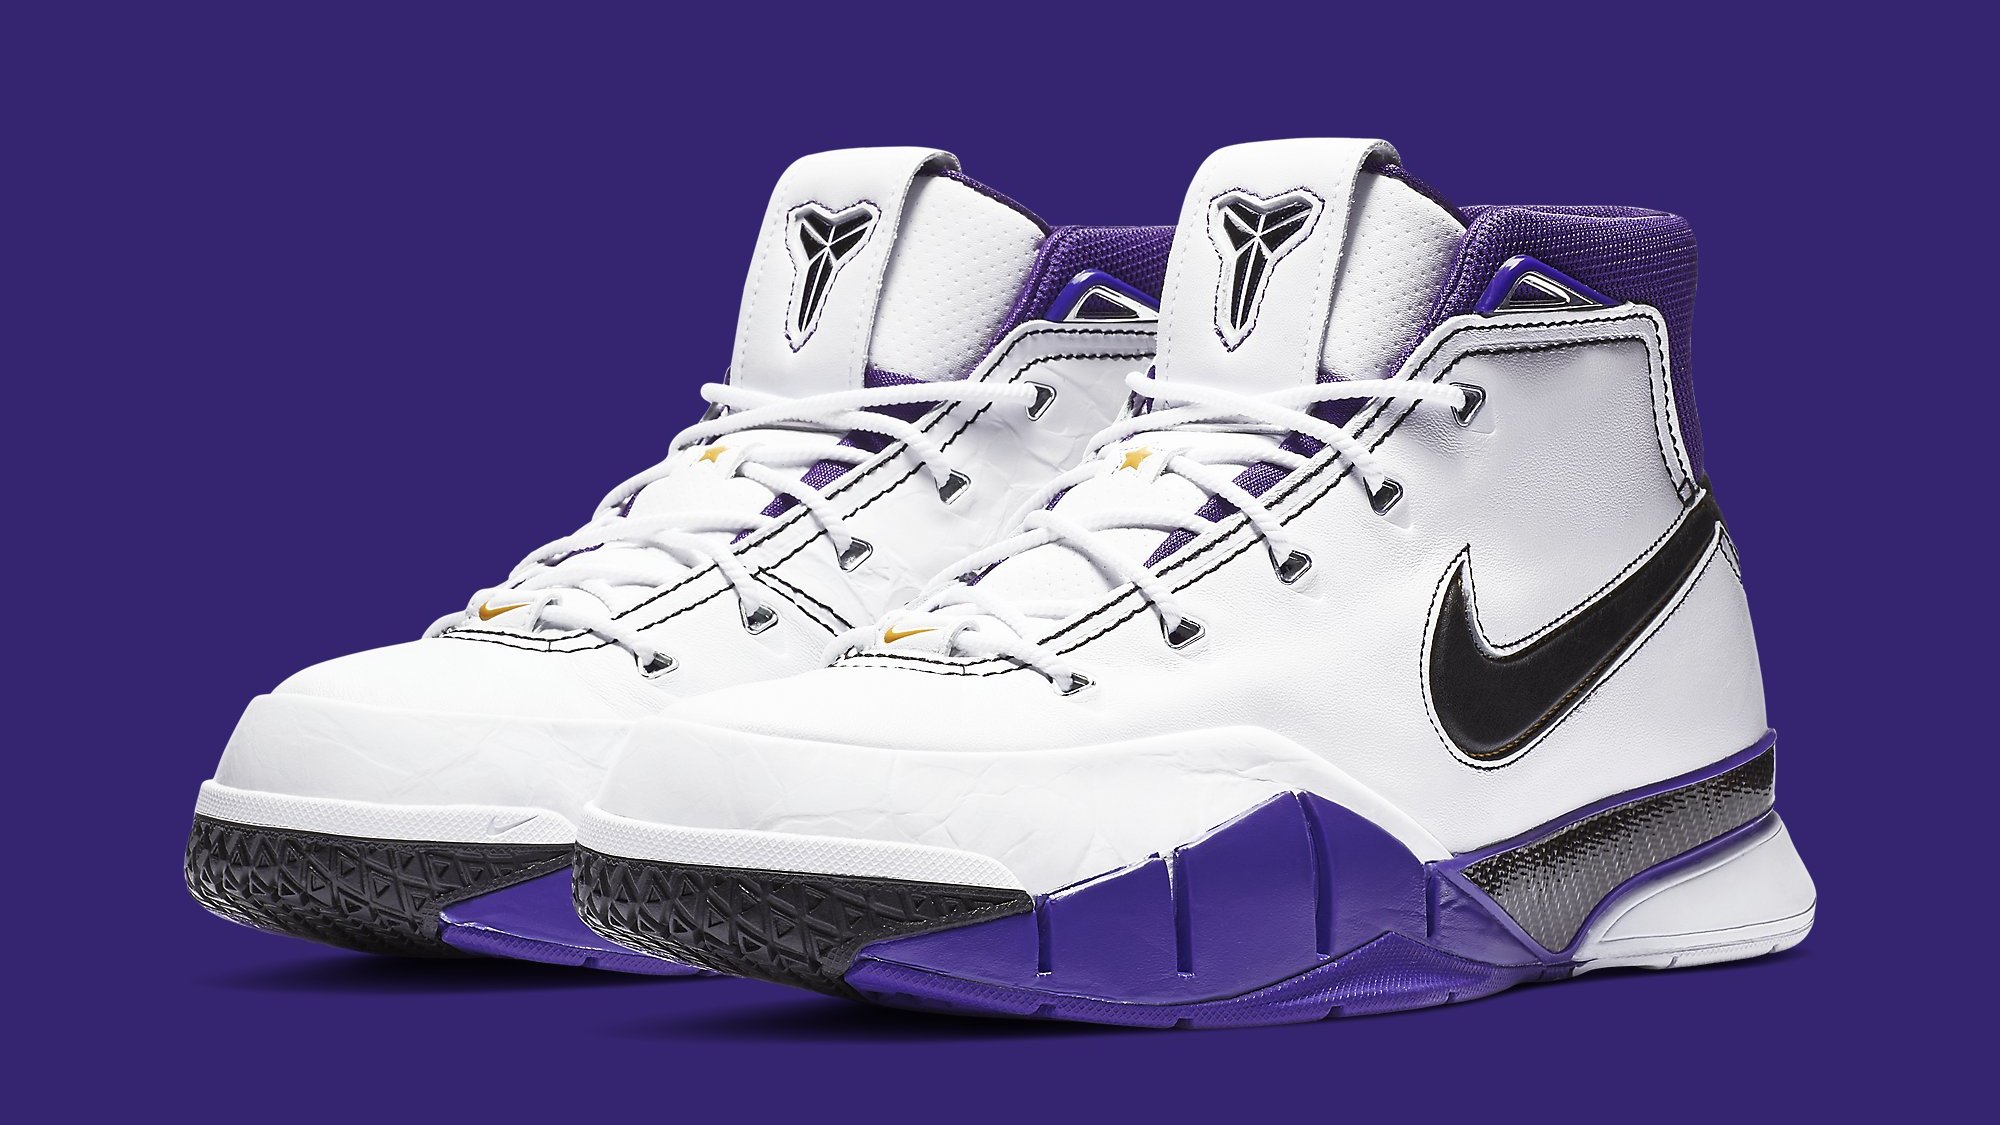 Nike Kobe 1 Protro 81 Points Release Date AQ2728-105 | Sole Collector